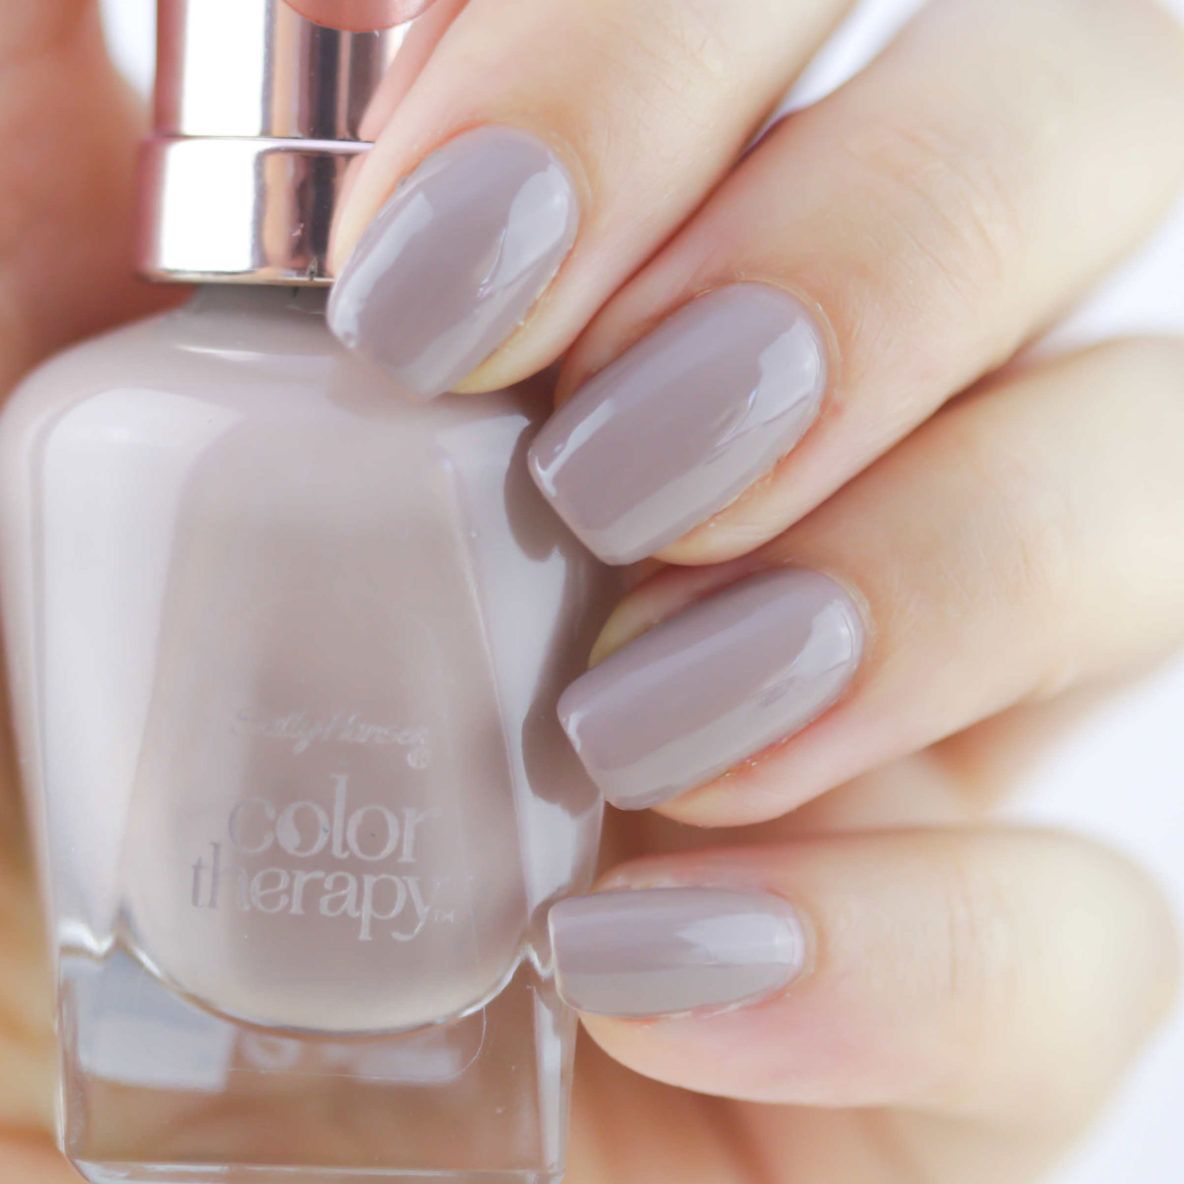 Give Your Nails Spa Luxury With New Sally Hansen Color Therapy Sally Hansen Color Therapy Nail Polish Nails